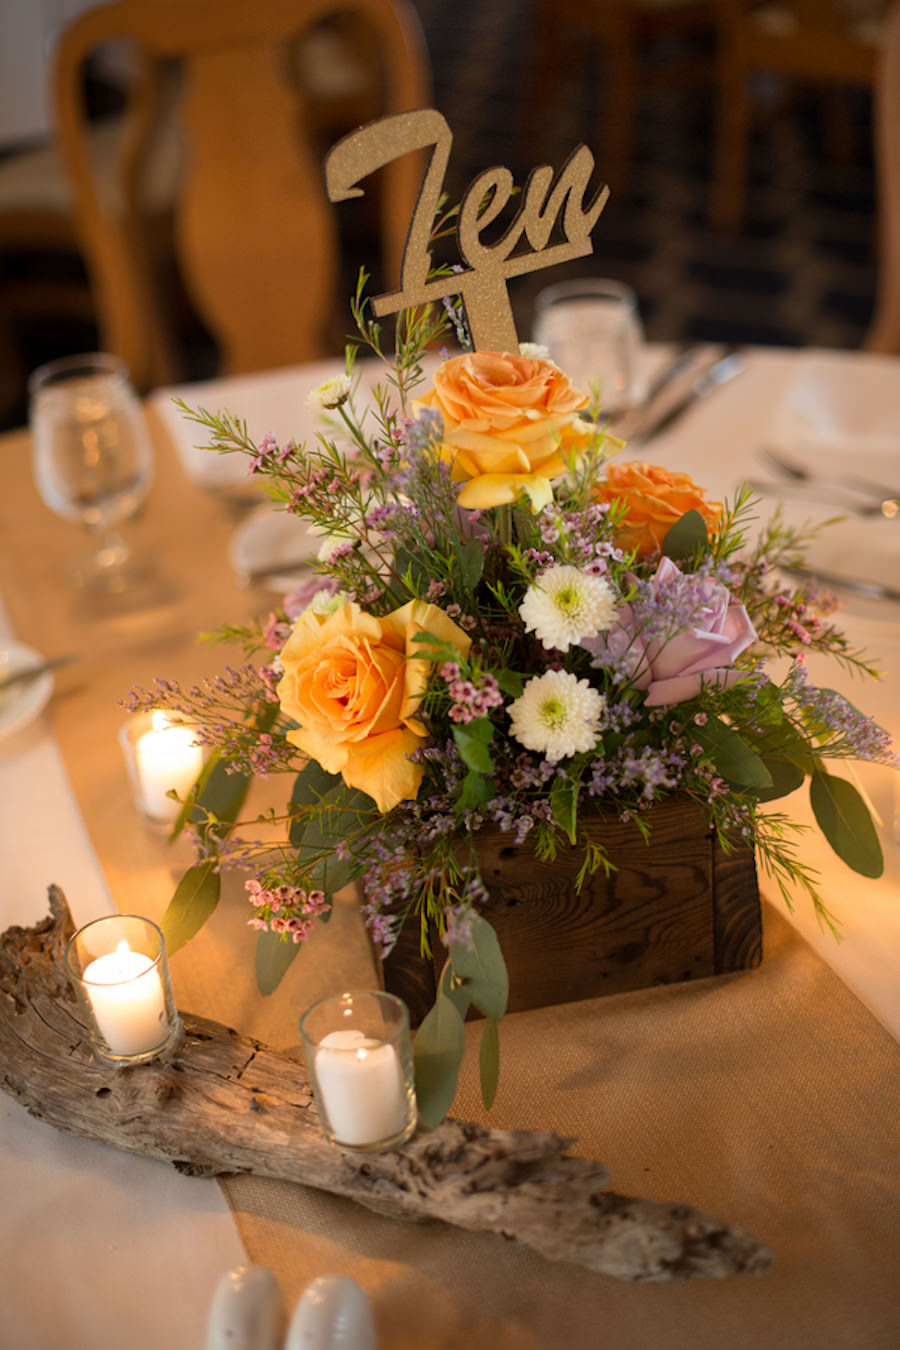 Clearwater Wedding Reception Table Decor with Peach and Purple Flowers in Wooden Boxed Centerpiece and Driftwood with Candles